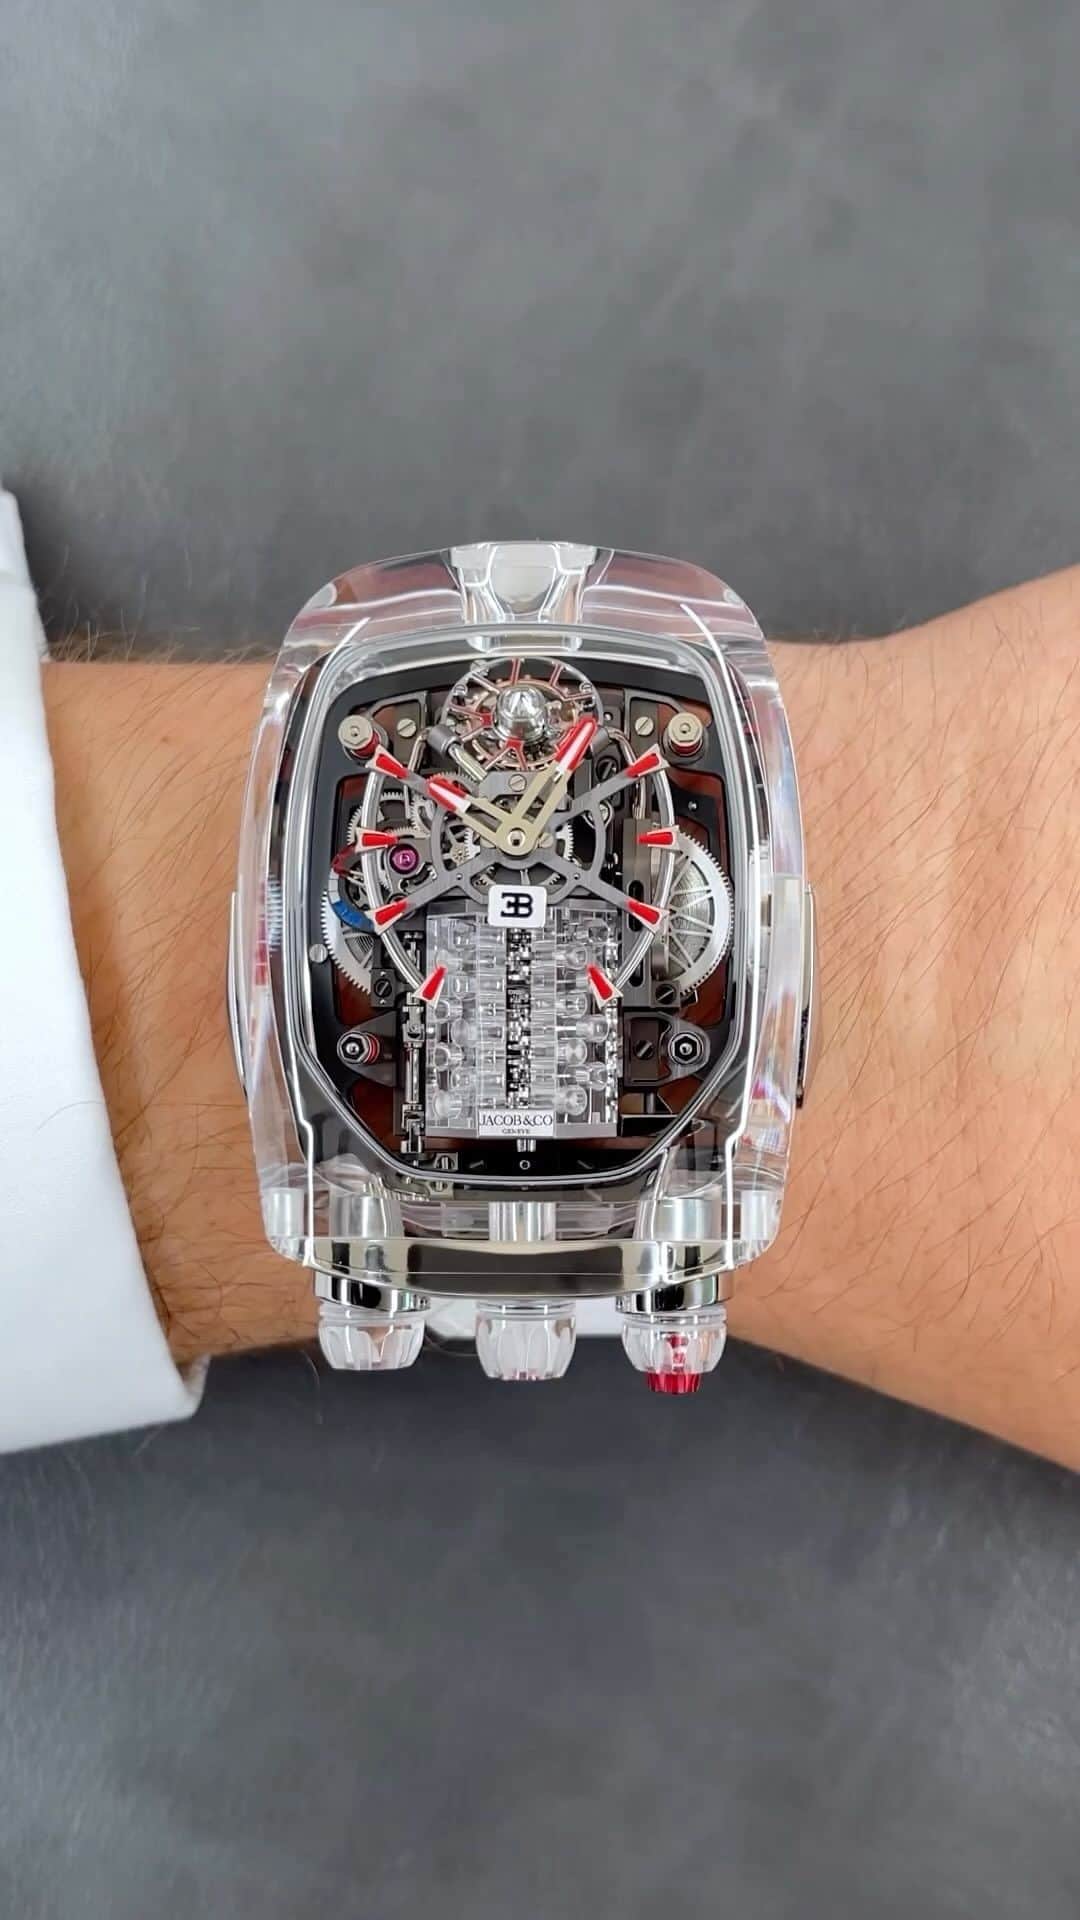 Daily Watchのインスタグラム：「The $1.3 million @Jacobandco Bugatti Chiron Sapphire Crystal. Presented in full sapphire crystal case with anti-reflective coating. Measuring 57.8mm in length, 44.4mm in width and 21.5mm in height. Limited edition of 7 pieces 🔥 #jacobandco」